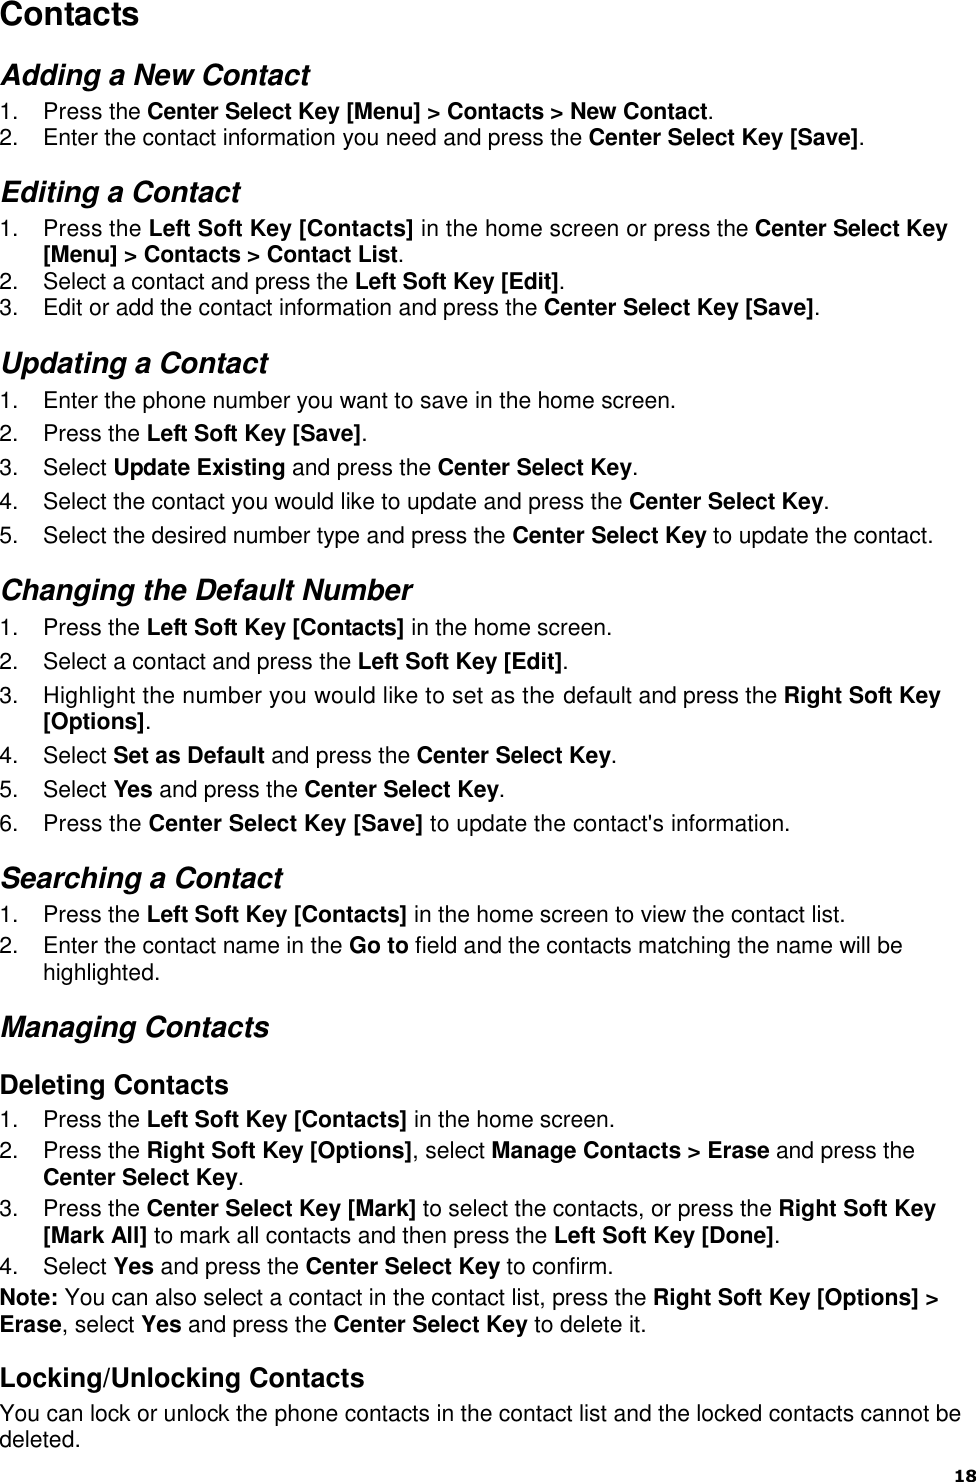  18   Contacts Adding a New Contact 1.  Press the Center Select Key [Menu] &gt; Contacts &gt; New Contact. 2.  Enter the contact information you need and press the Center Select Key [Save]. Editing a Contact 1.  Press the Left Soft Key [Contacts] in the home screen or press the Center Select Key [Menu] &gt; Contacts &gt; Contact List. 2.  Select a contact and press the Left Soft Key [Edit]. 3.  Edit or add the contact information and press the Center Select Key [Save]. Updating a Contact 1.  Enter the phone number you want to save in the home screen. 2.  Press the Left Soft Key [Save]. 3.  Select Update Existing and press the Center Select Key. 4.  Select the contact you would like to update and press the Center Select Key. 5.  Select the desired number type and press the Center Select Key to update the contact. Changing the Default Number 1.  Press the Left Soft Key [Contacts] in the home screen. 2.  Select a contact and press the Left Soft Key [Edit]. 3.  Highlight the number you would like to set as the default and press the Right Soft Key [Options]. 4.  Select Set as Default and press the Center Select Key. 5.  Select Yes and press the Center Select Key. 6.  Press the Center Select Key [Save] to update the contact&apos;s information. Searching a Contact 1.  Press the Left Soft Key [Contacts] in the home screen to view the contact list. 2.  Enter the contact name in the Go to field and the contacts matching the name will be highlighted. Managing Contacts Deleting Contacts 1.  Press the Left Soft Key [Contacts] in the home screen. 2.  Press the Right Soft Key [Options], select Manage Contacts &gt; Erase and press the Center Select Key.   3.  Press the Center Select Key [Mark] to select the contacts, or press the Right Soft Key [Mark All] to mark all contacts and then press the Left Soft Key [Done].   4.  Select Yes and press the Center Select Key to confirm. Note: You can also select a contact in the contact list, press the Right Soft Key [Options] &gt; Erase, select Yes and press the Center Select Key to delete it. Locking/Unlocking Contacts You can lock or unlock the phone contacts in the contact list and the locked contacts cannot be deleted. 